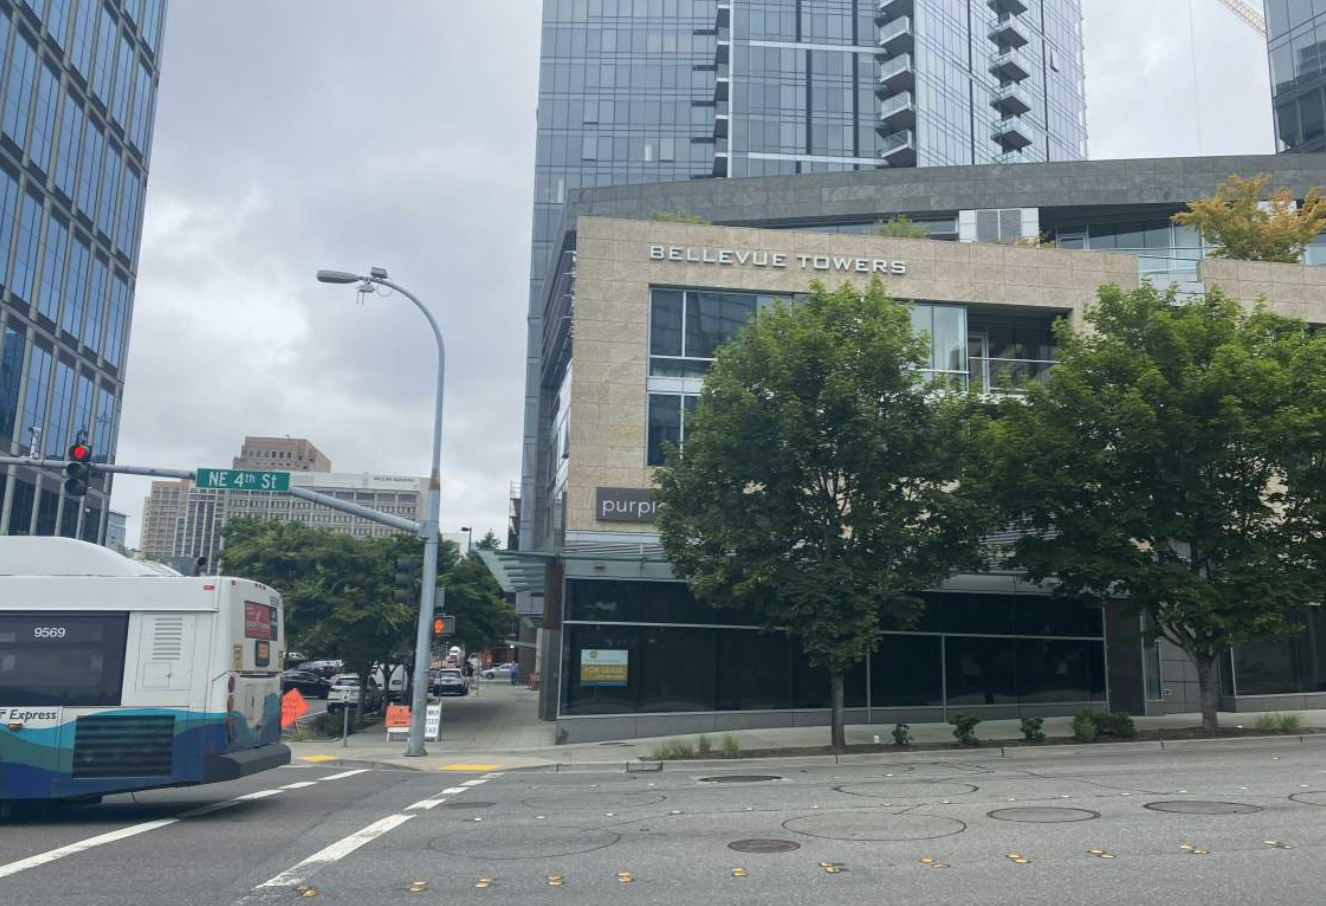 Walgreens Plans to Occupy Former Restaurant Space at Bellevue Towers